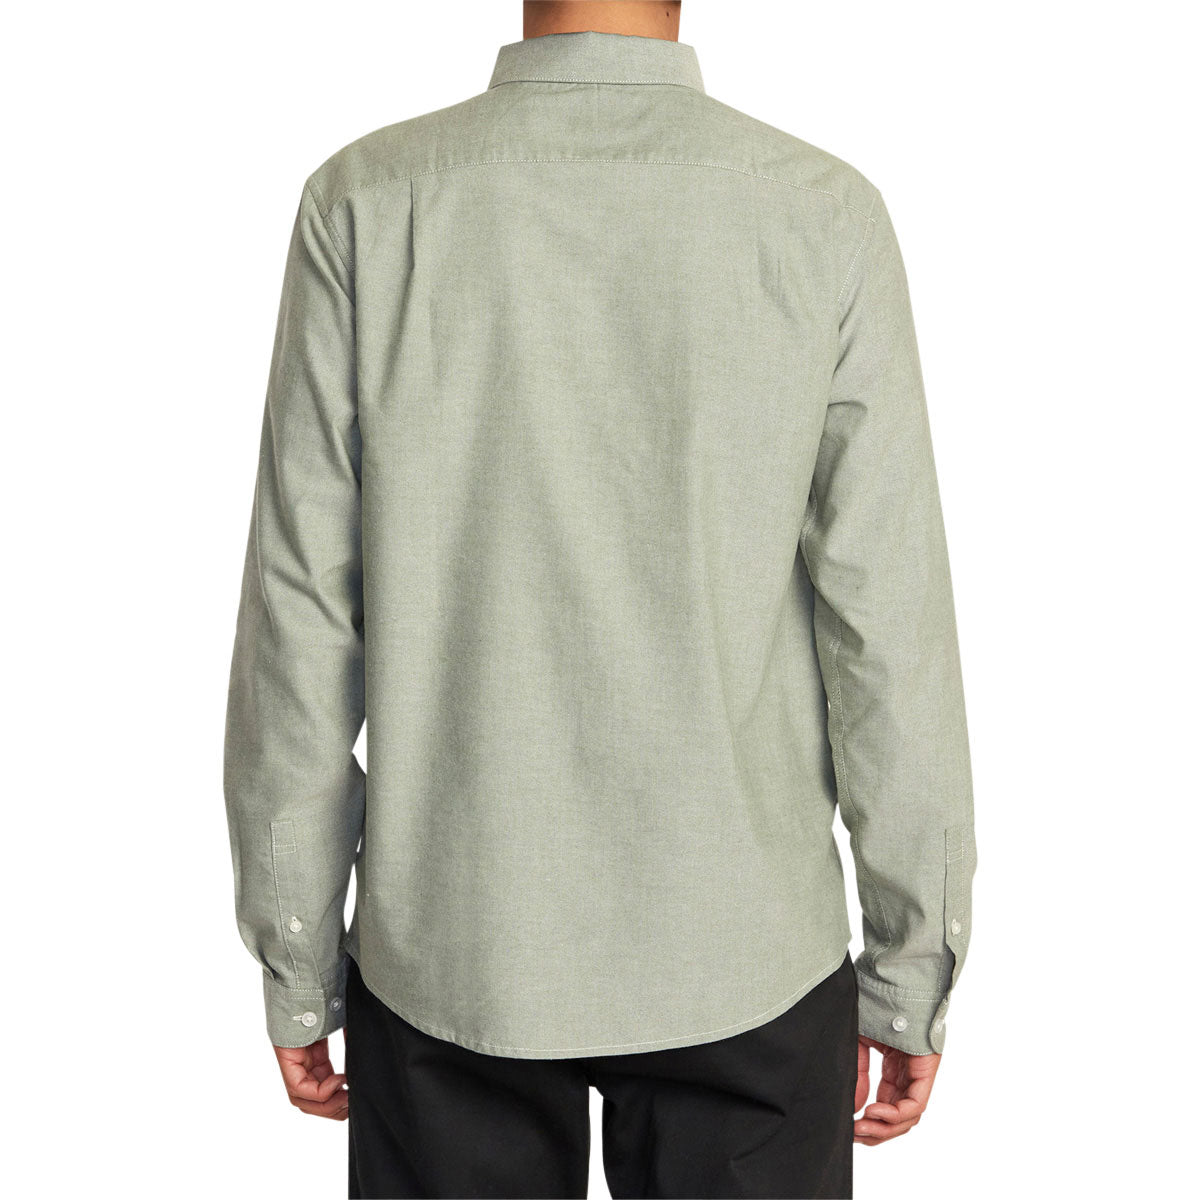 RVCA That'll Do Stretch Long Sleeve Shirt - College Green image 2